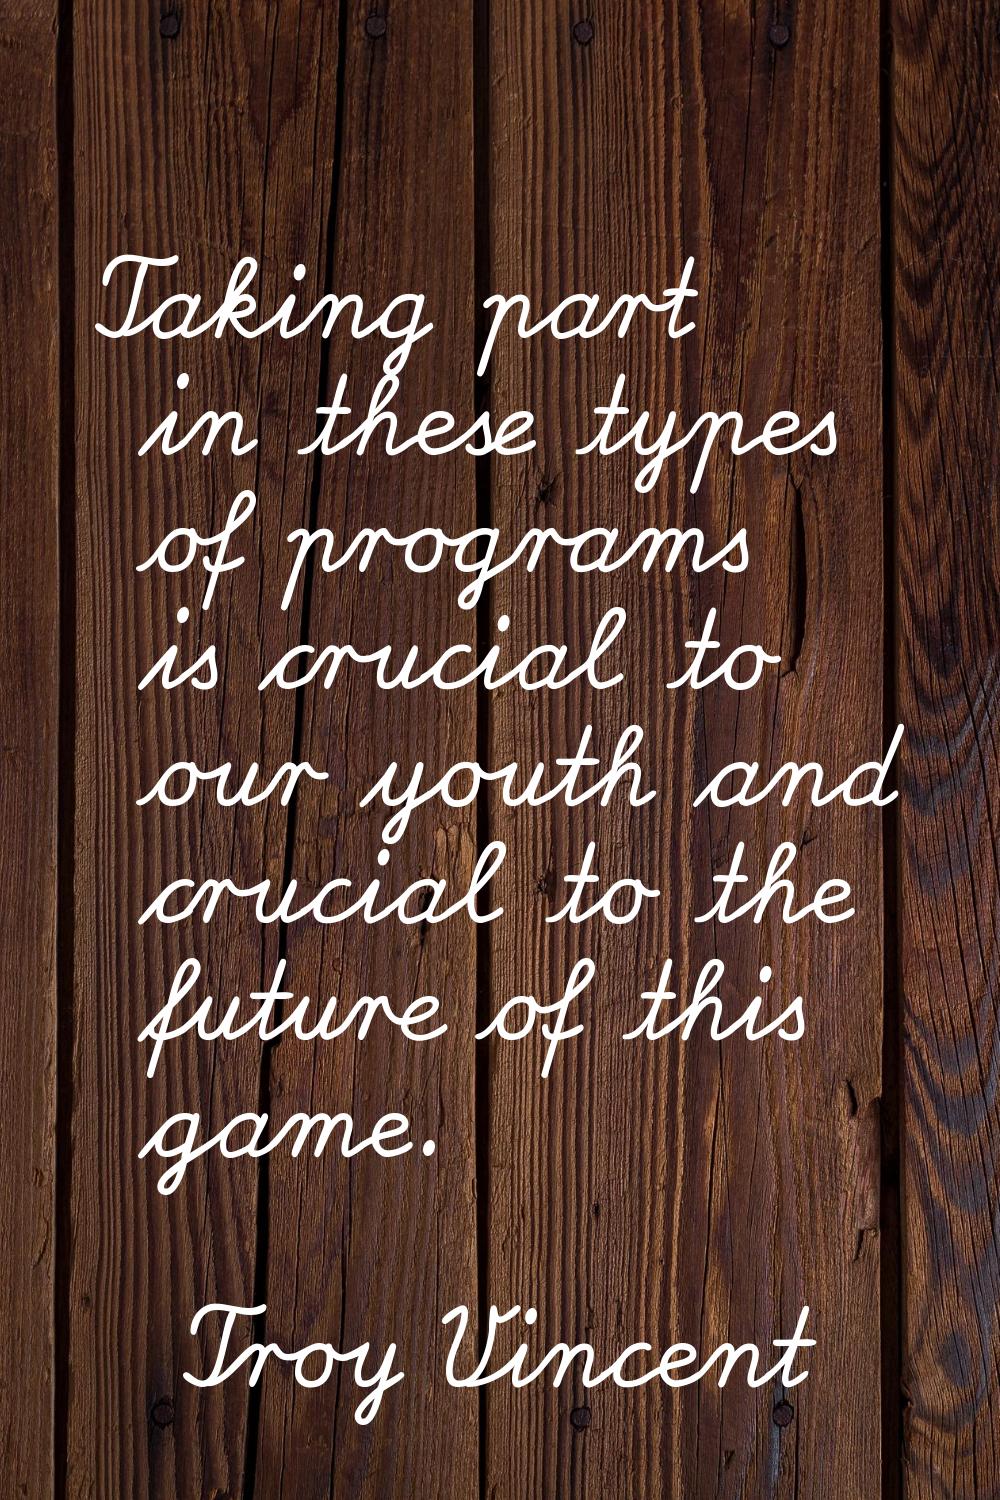 Taking part in these types of programs is crucial to our youth and crucial to the future of this ga